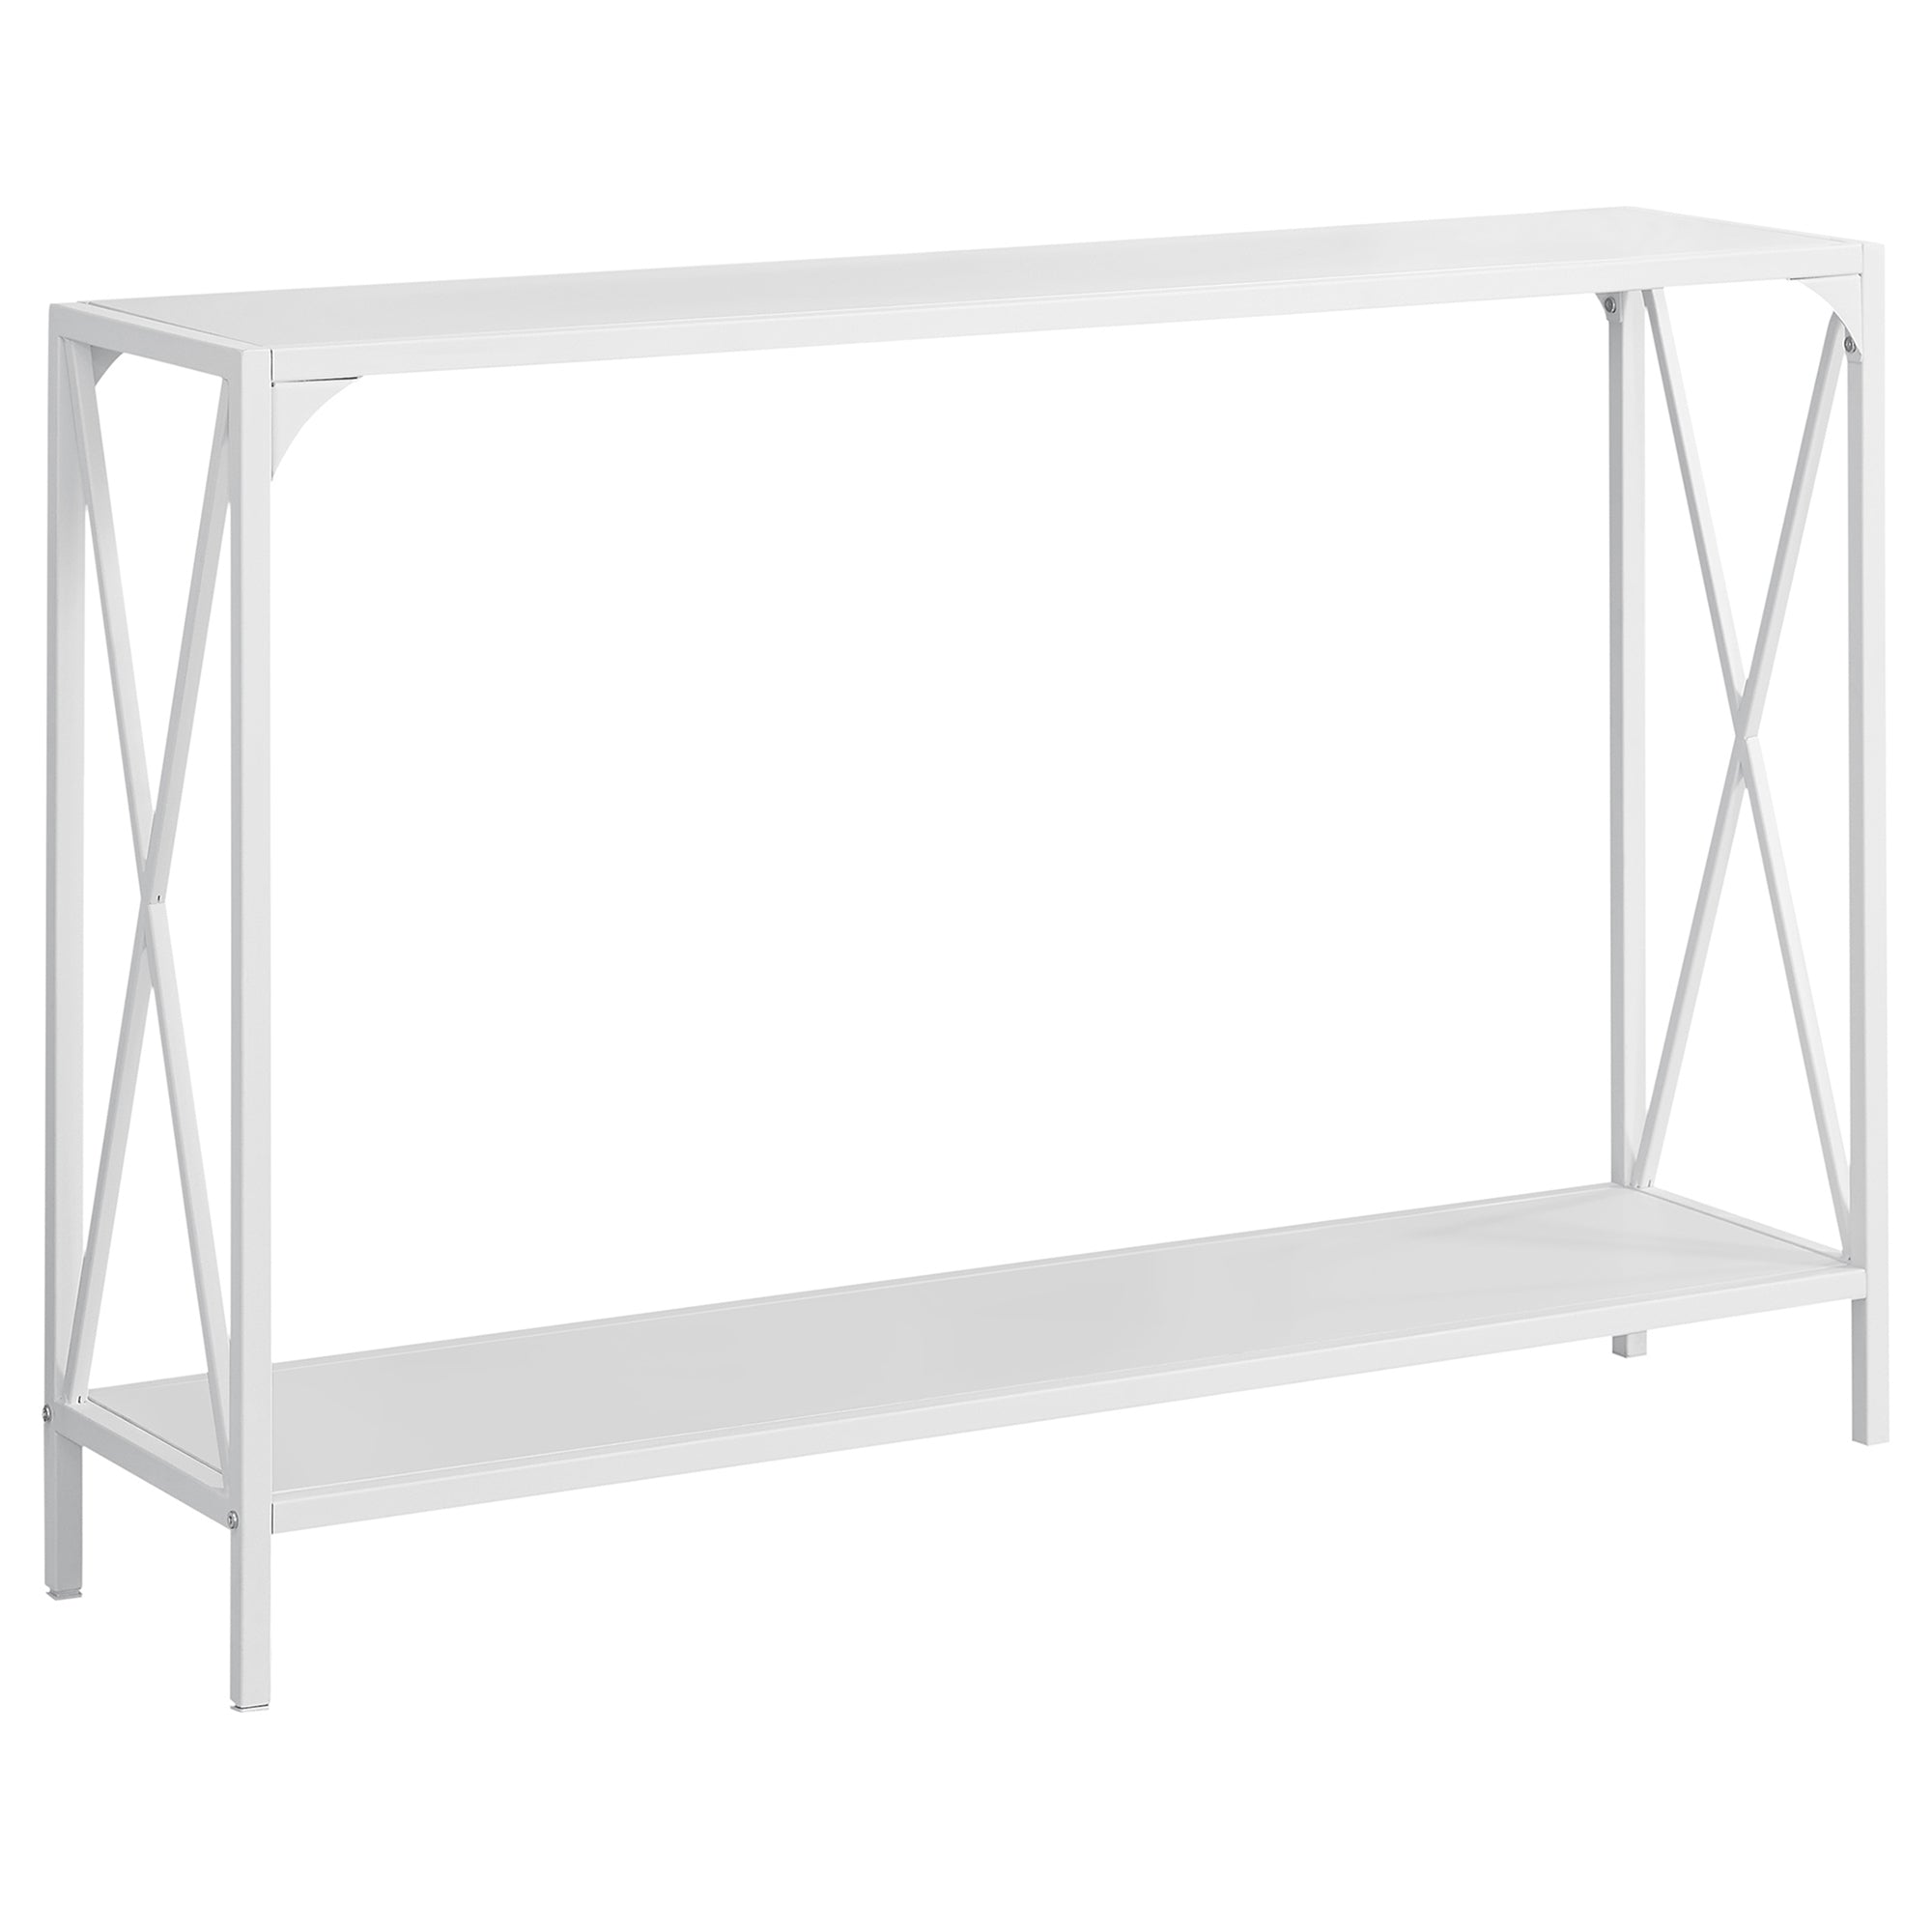 ACCENT TABLE - 48"L / WHITE / WHITE METAL HALL CONSOLE